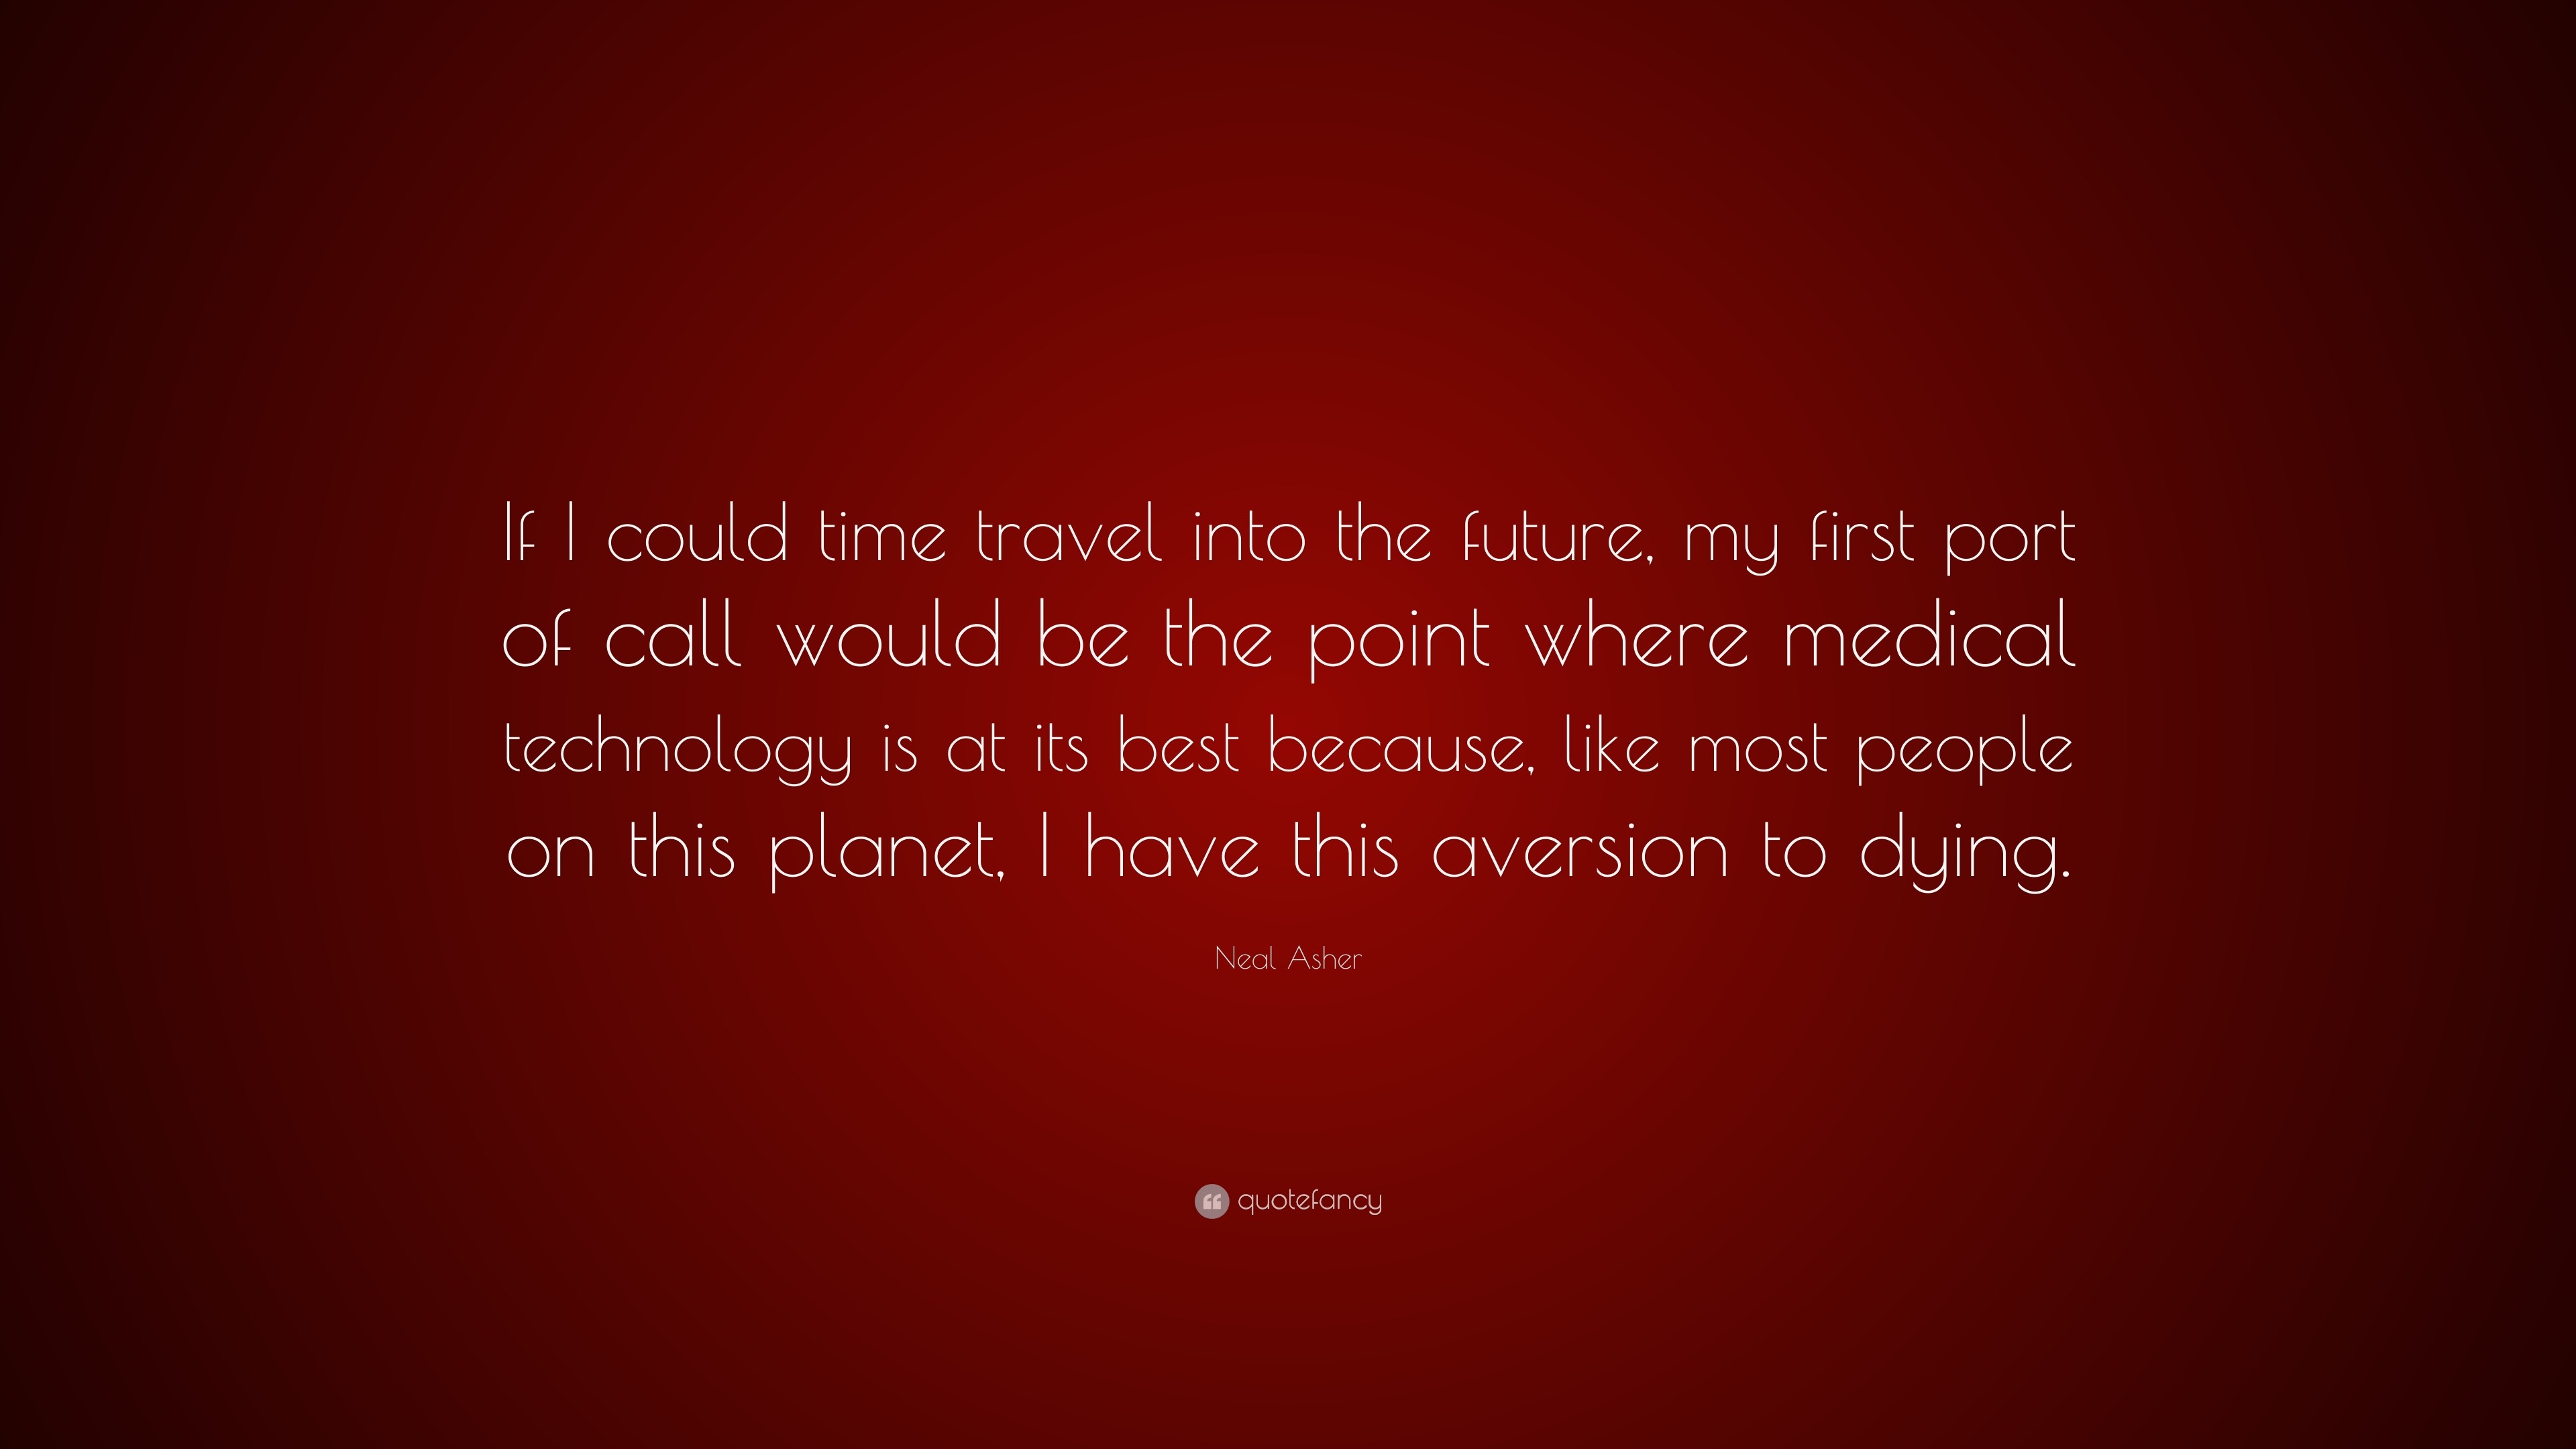 Neal Asher Quote If I Could Time Travel Into The Future My First Port Of Call Would Be The Point Where Medical Technology Is At Its Best